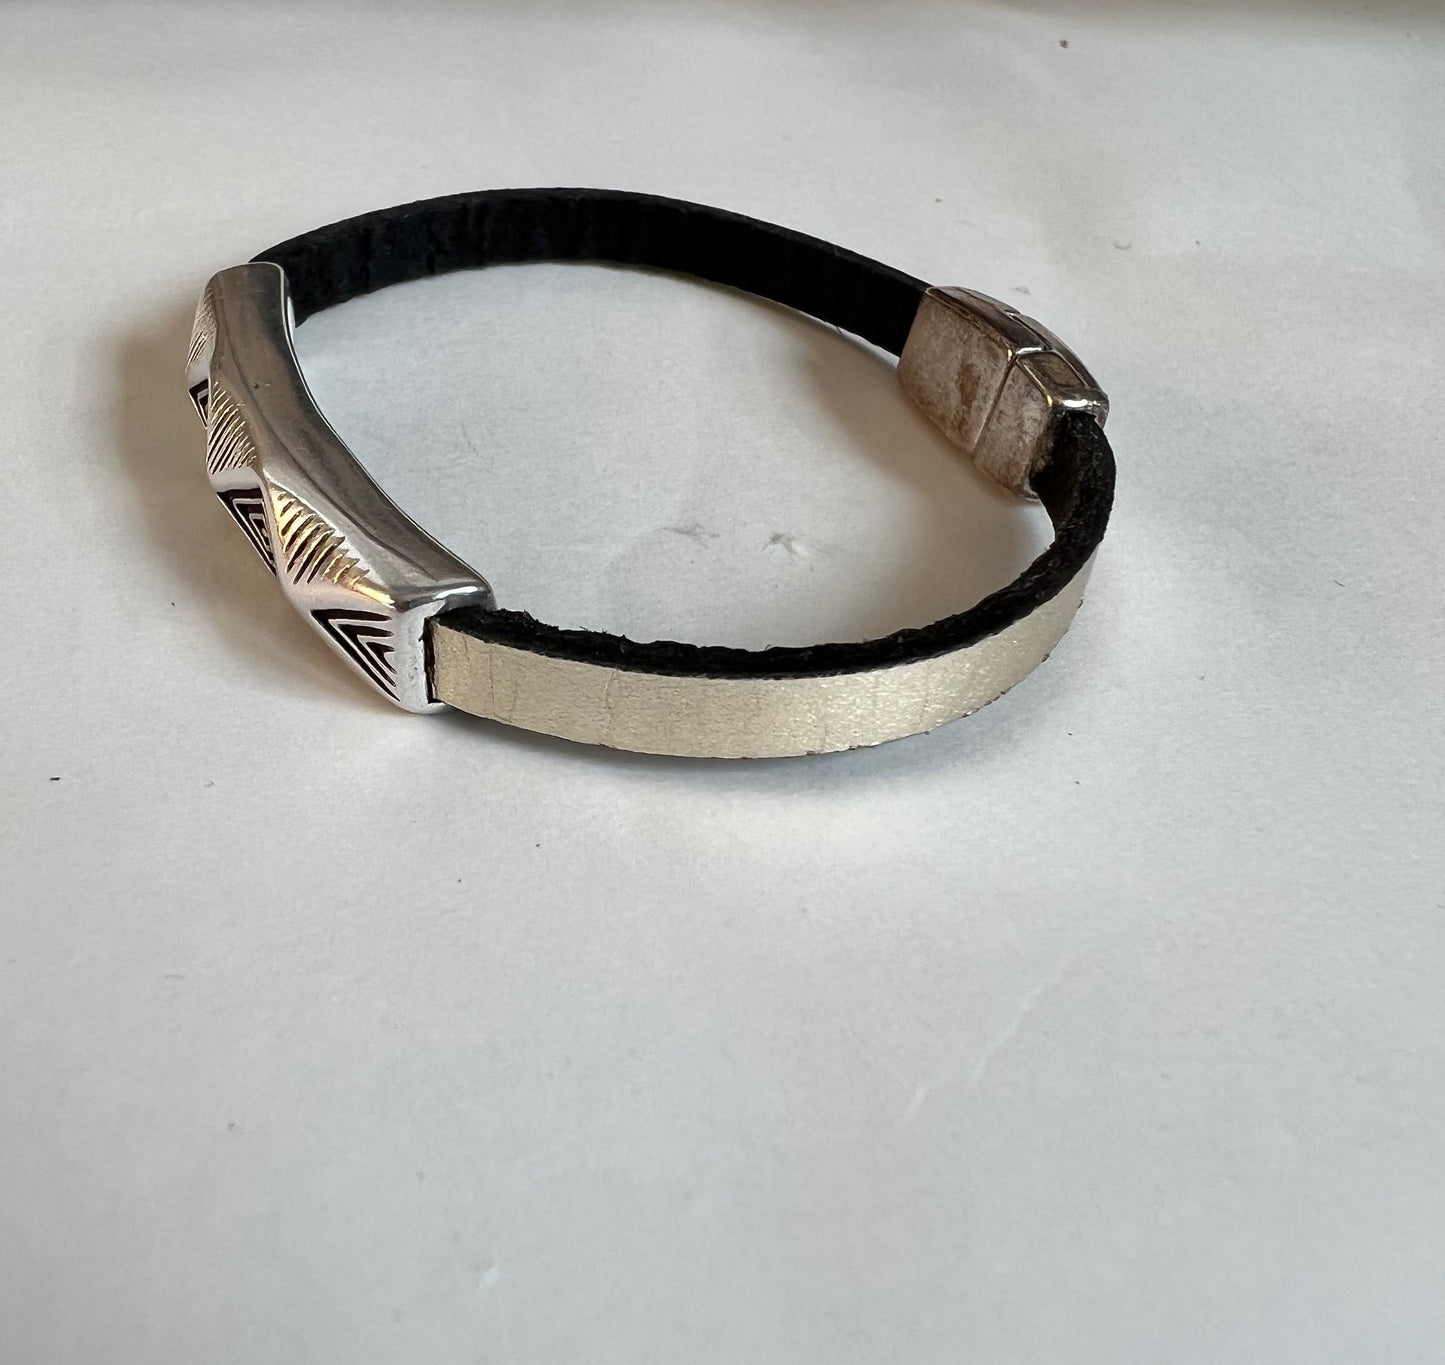 Italian rich gold metallic color leather bracelet with a silver fine design accent tube .  Silver magnetic clasp. Soft leather and trendy clasp.